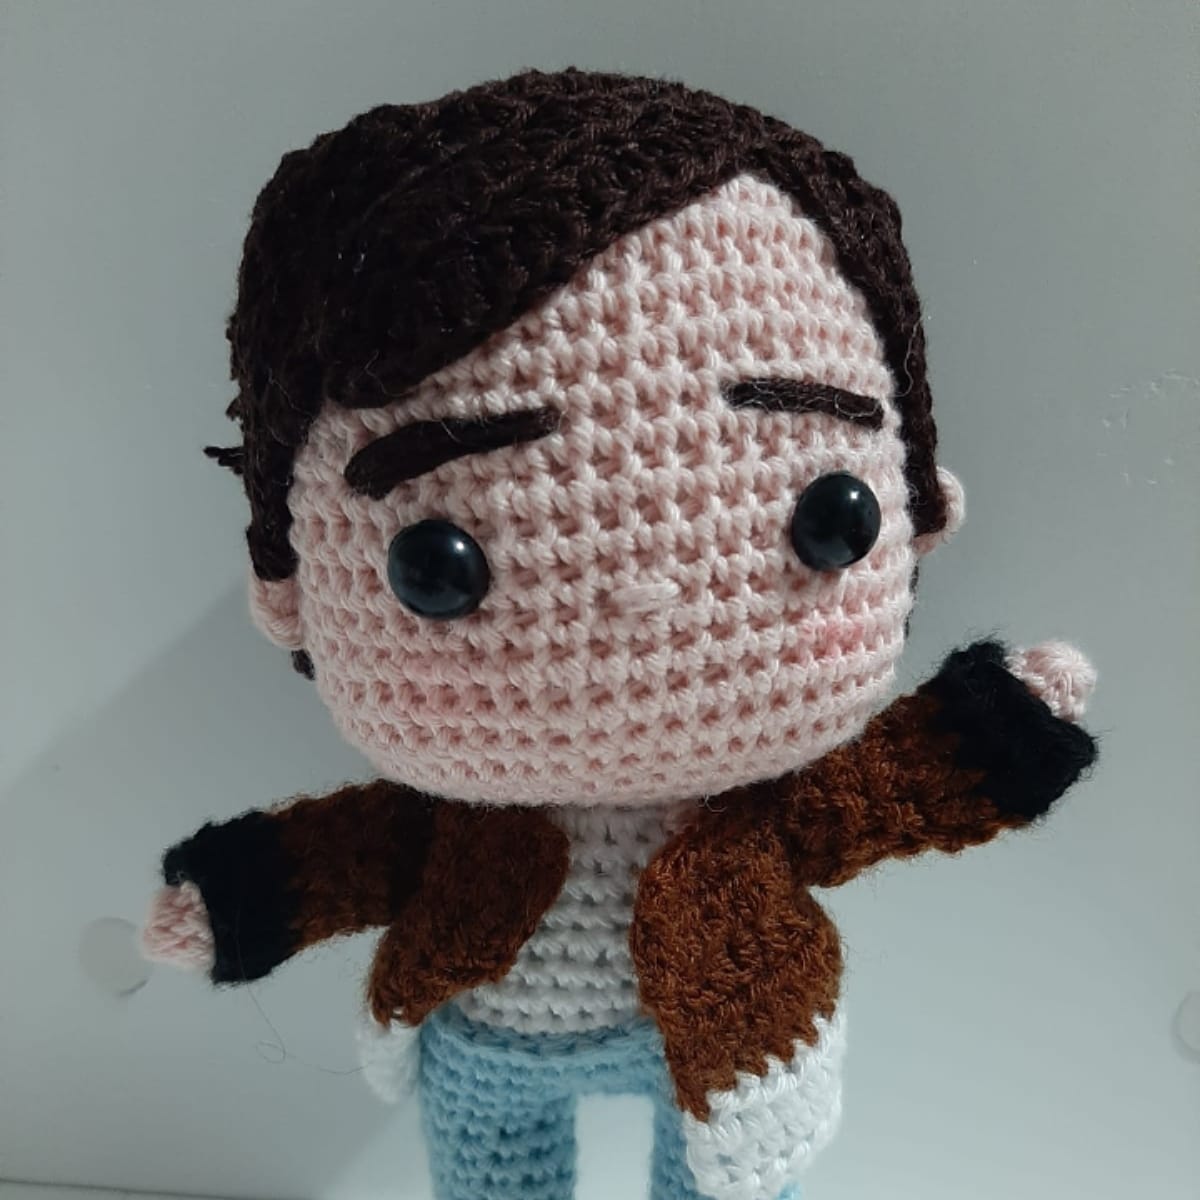 Hi @Louis_Tomlinson , I'm a fan of yours from Peru, my mom made this little doll of you for me, I wanted to show you, I love so much

@LTHQOfficial @LTHQOfficial https://t.co/9XWlzl2bz9